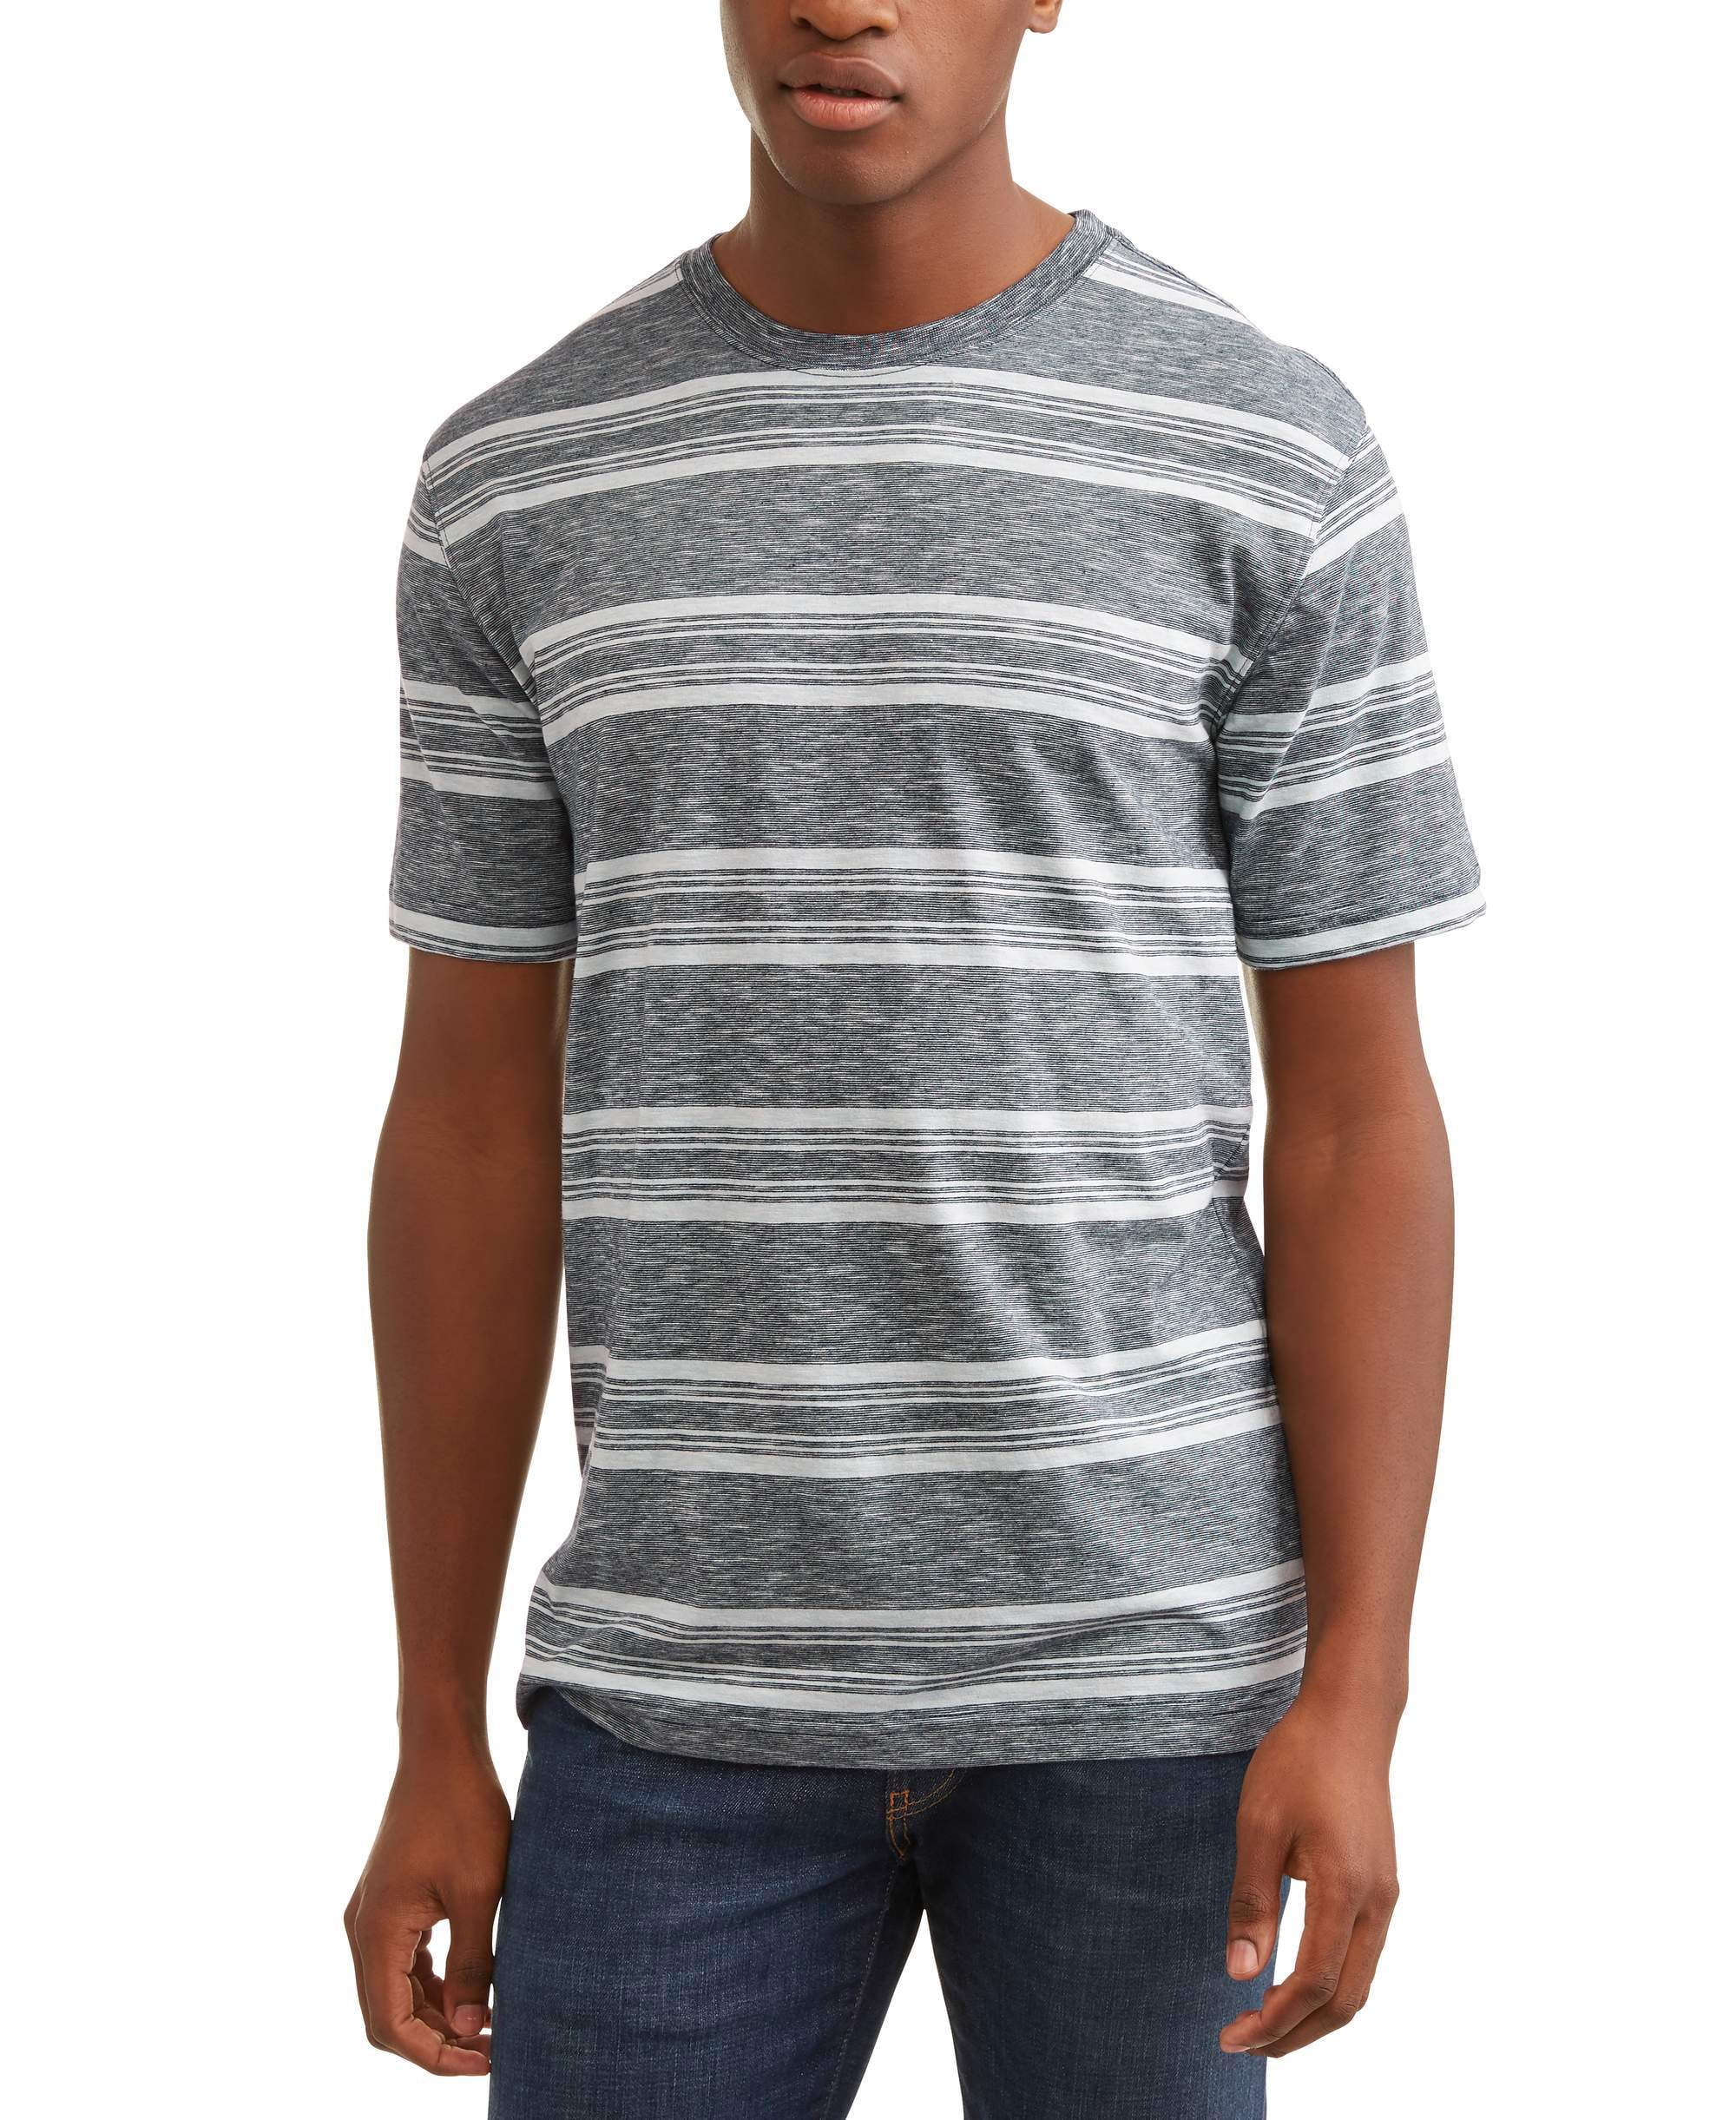 George Men's and big and tall men's stripe tee, up to size 3xlt ...